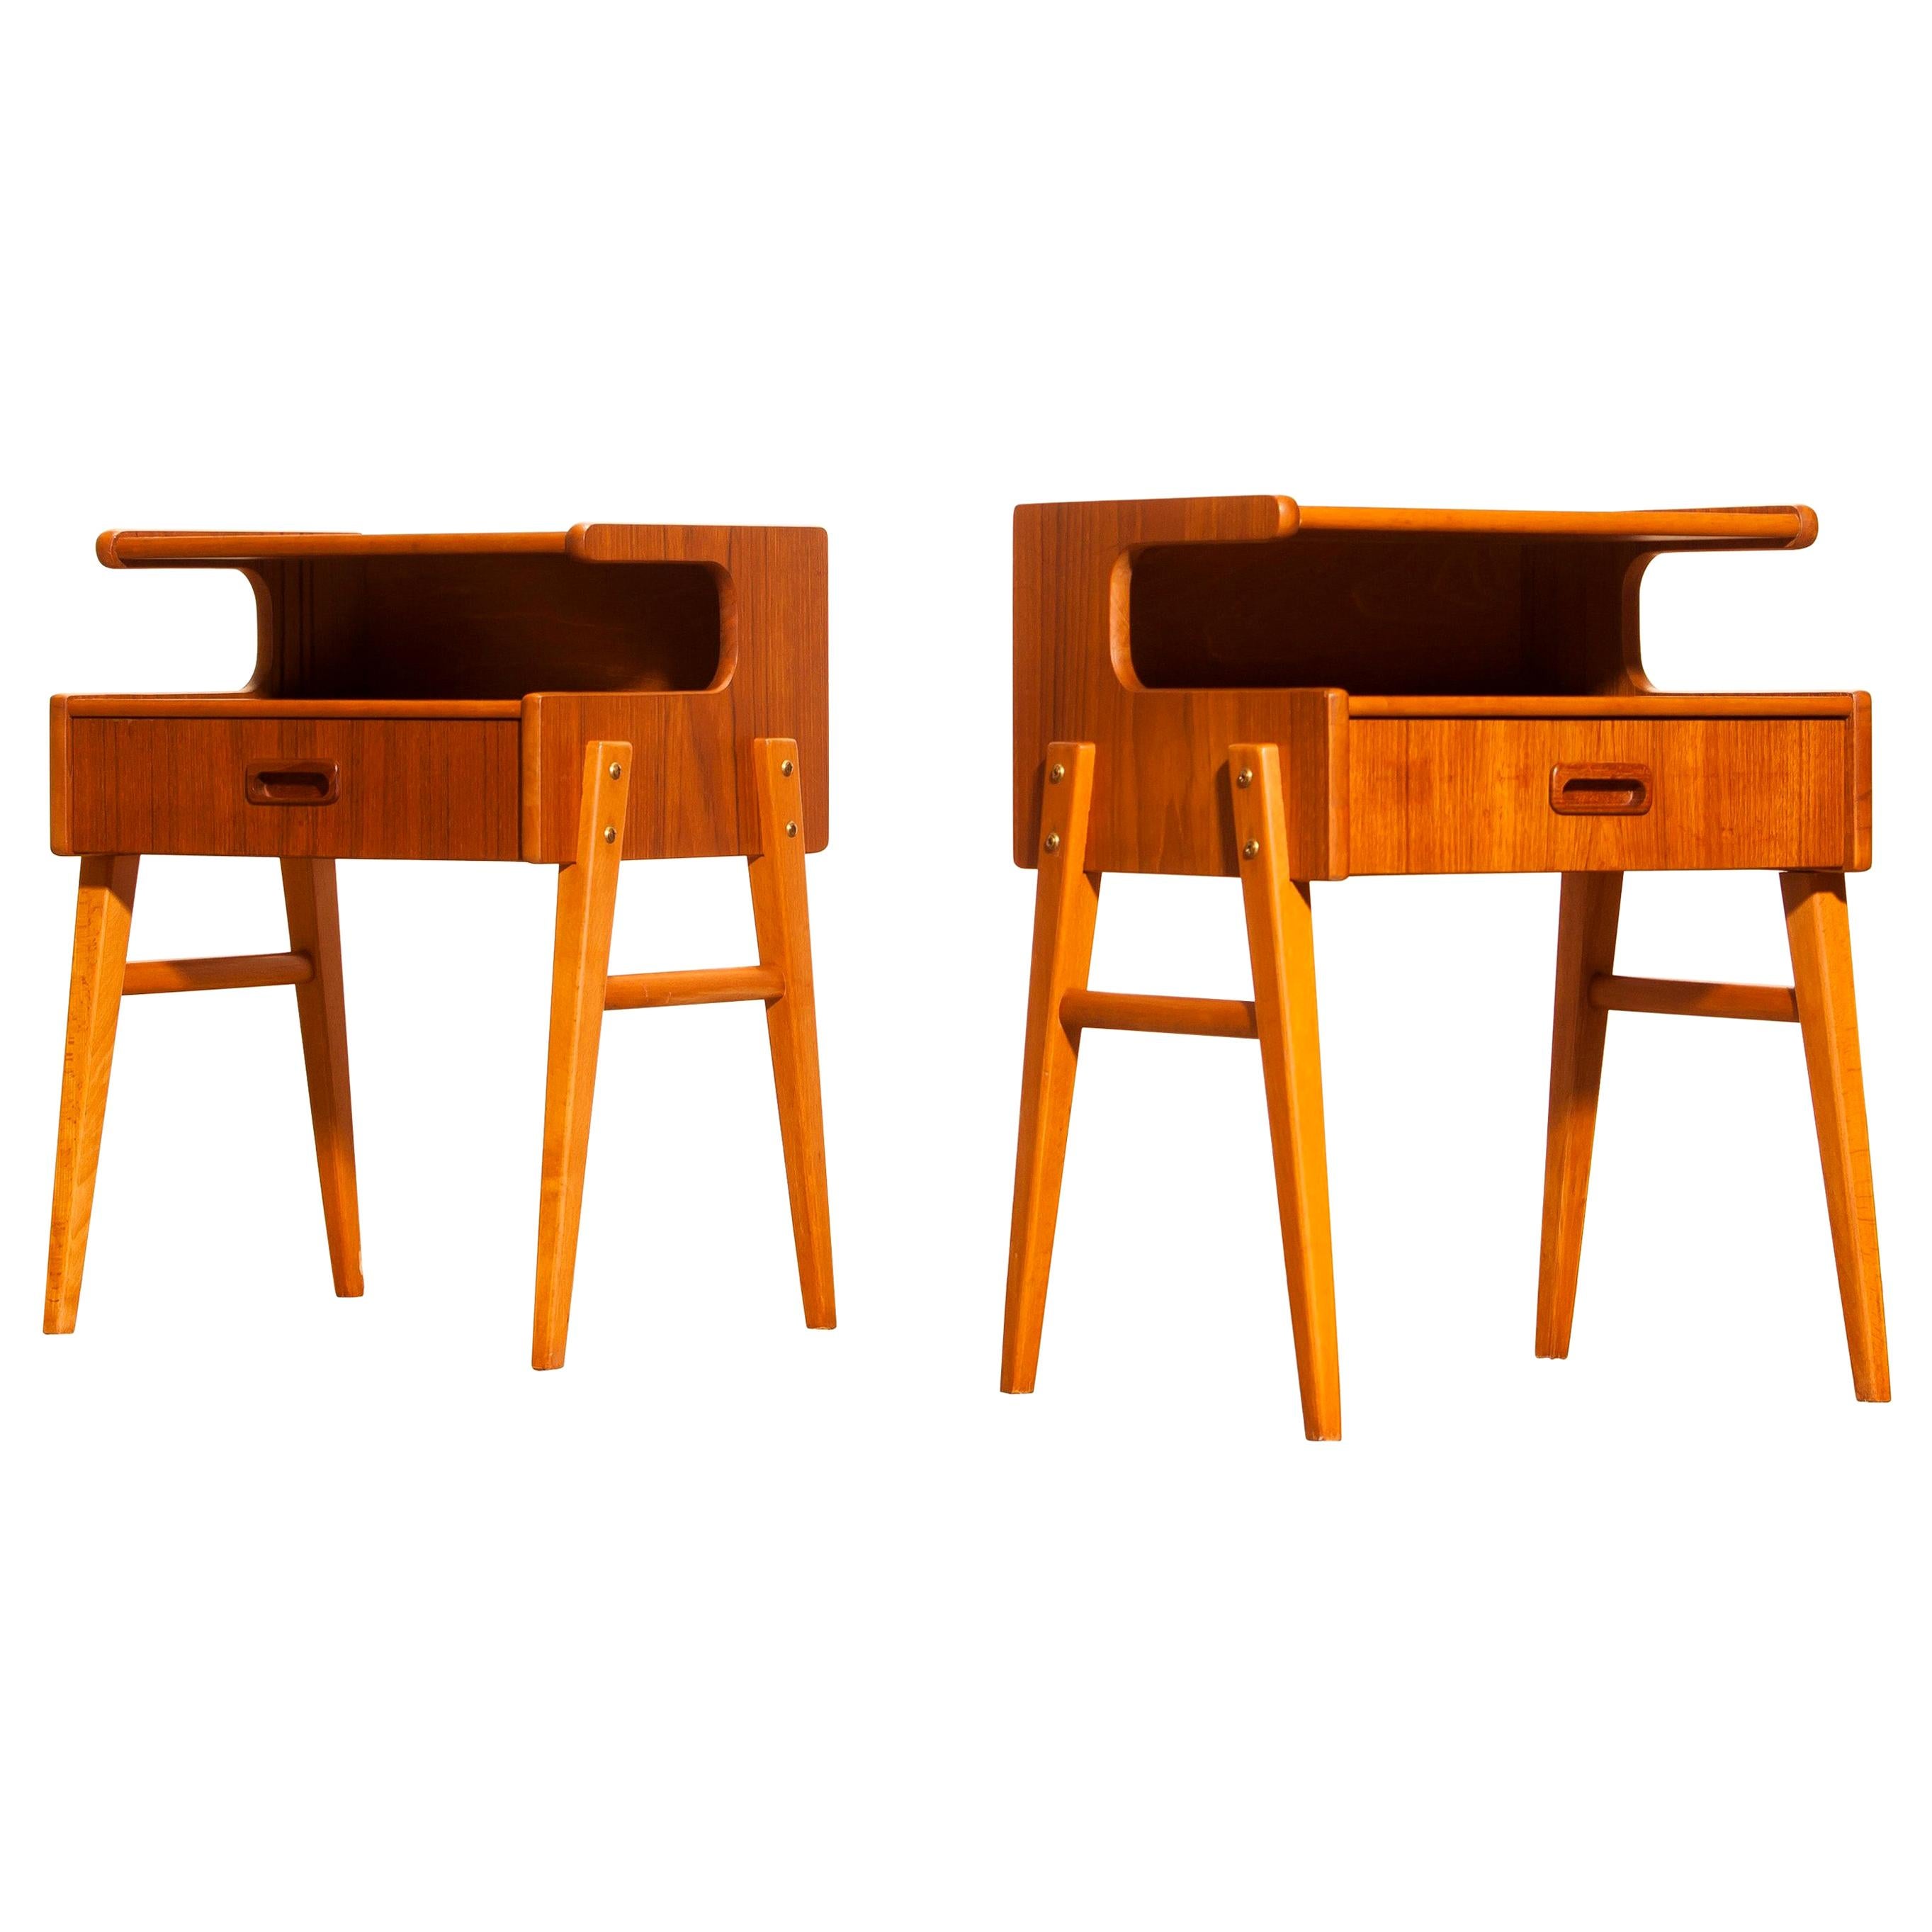 A pair of two lovely bedside tables in beautiful ‘C’ shape.
These tables are made of teak.
Each table has a drawer.
They are in very nice condition.
Period 1950s.
Dimensions: H 54 cm, W 40 cm, D 33 cm.